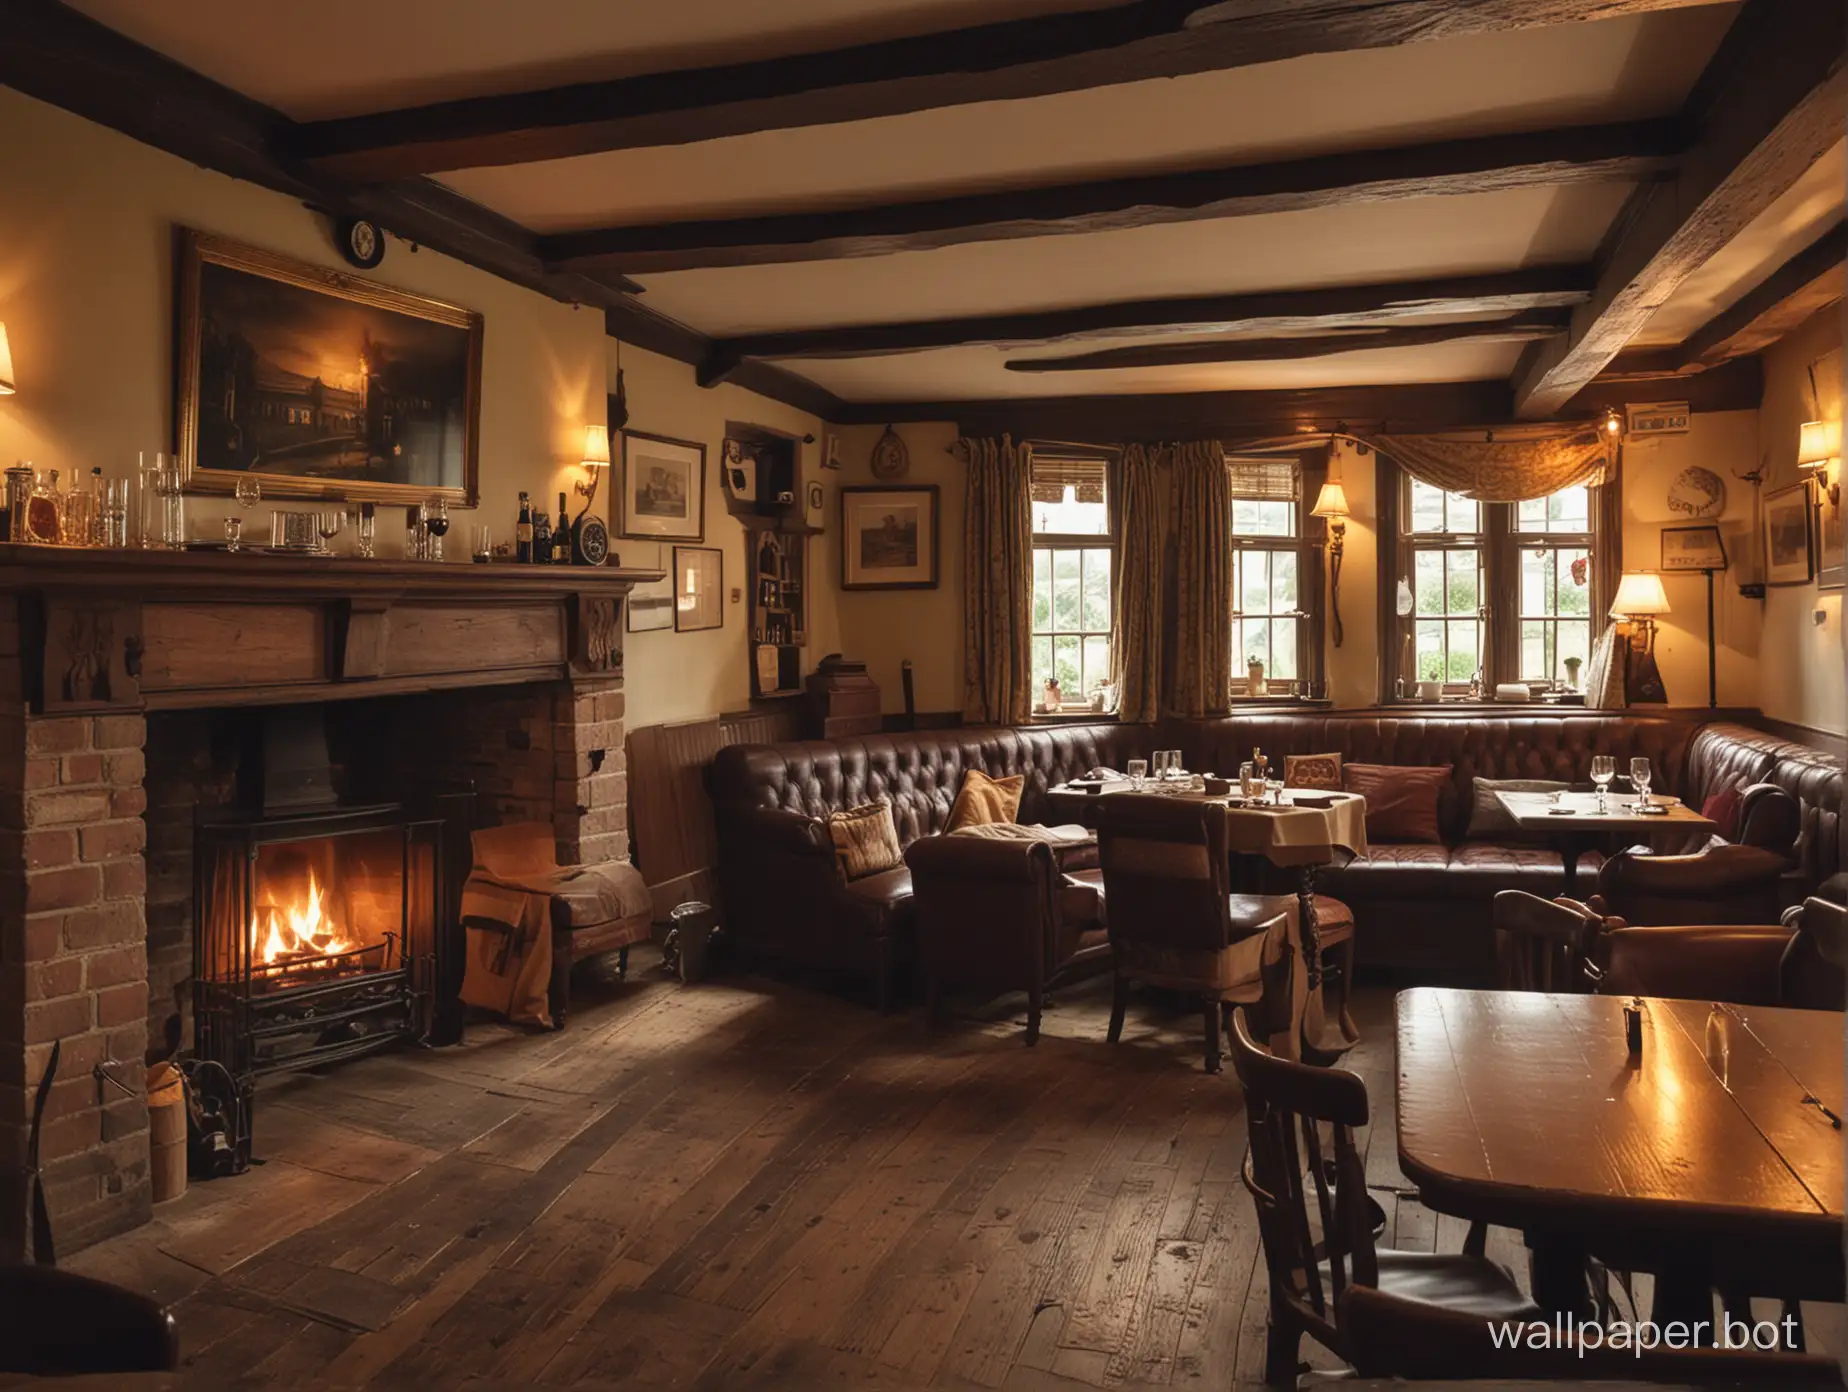 The inside of a classic cosy English country pub. Lots of atmosphere.